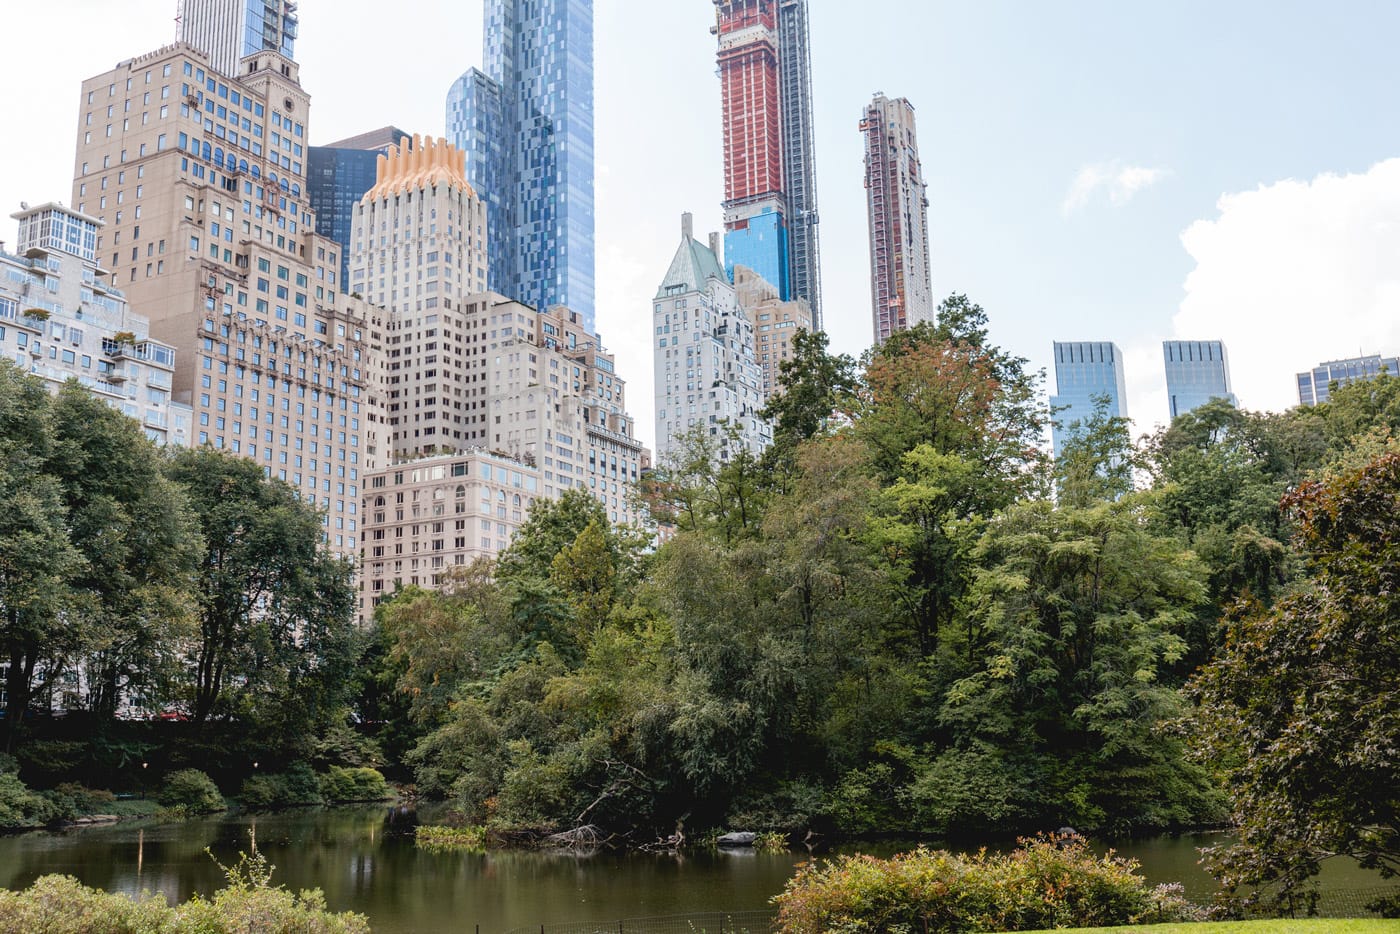 The Best Things to Do in New York City